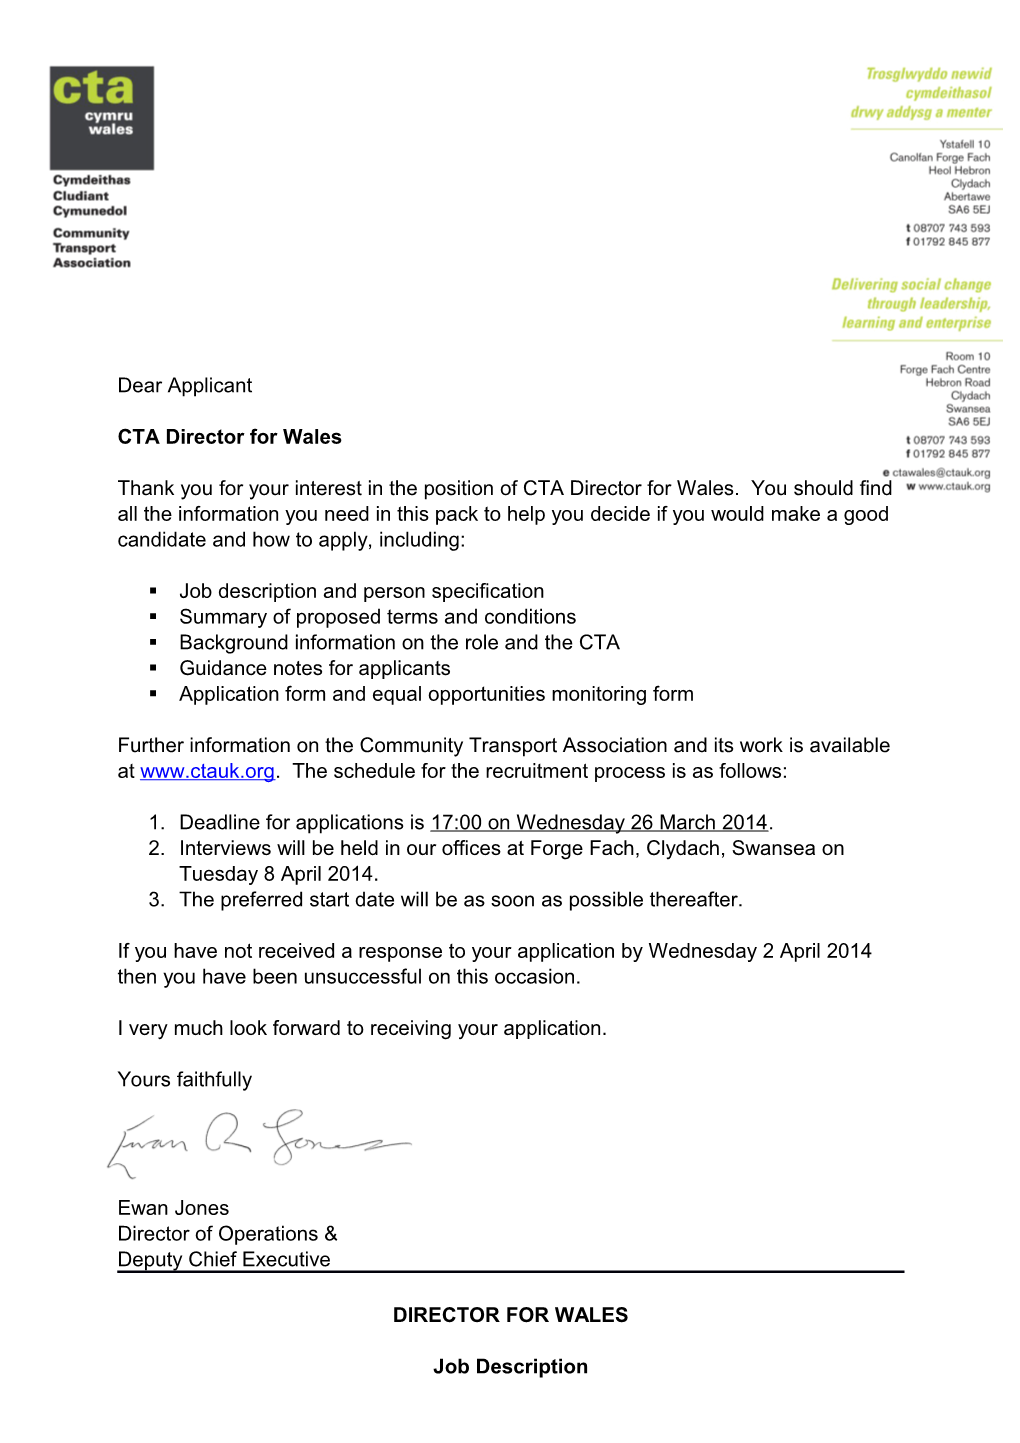 CTA Director for Wales